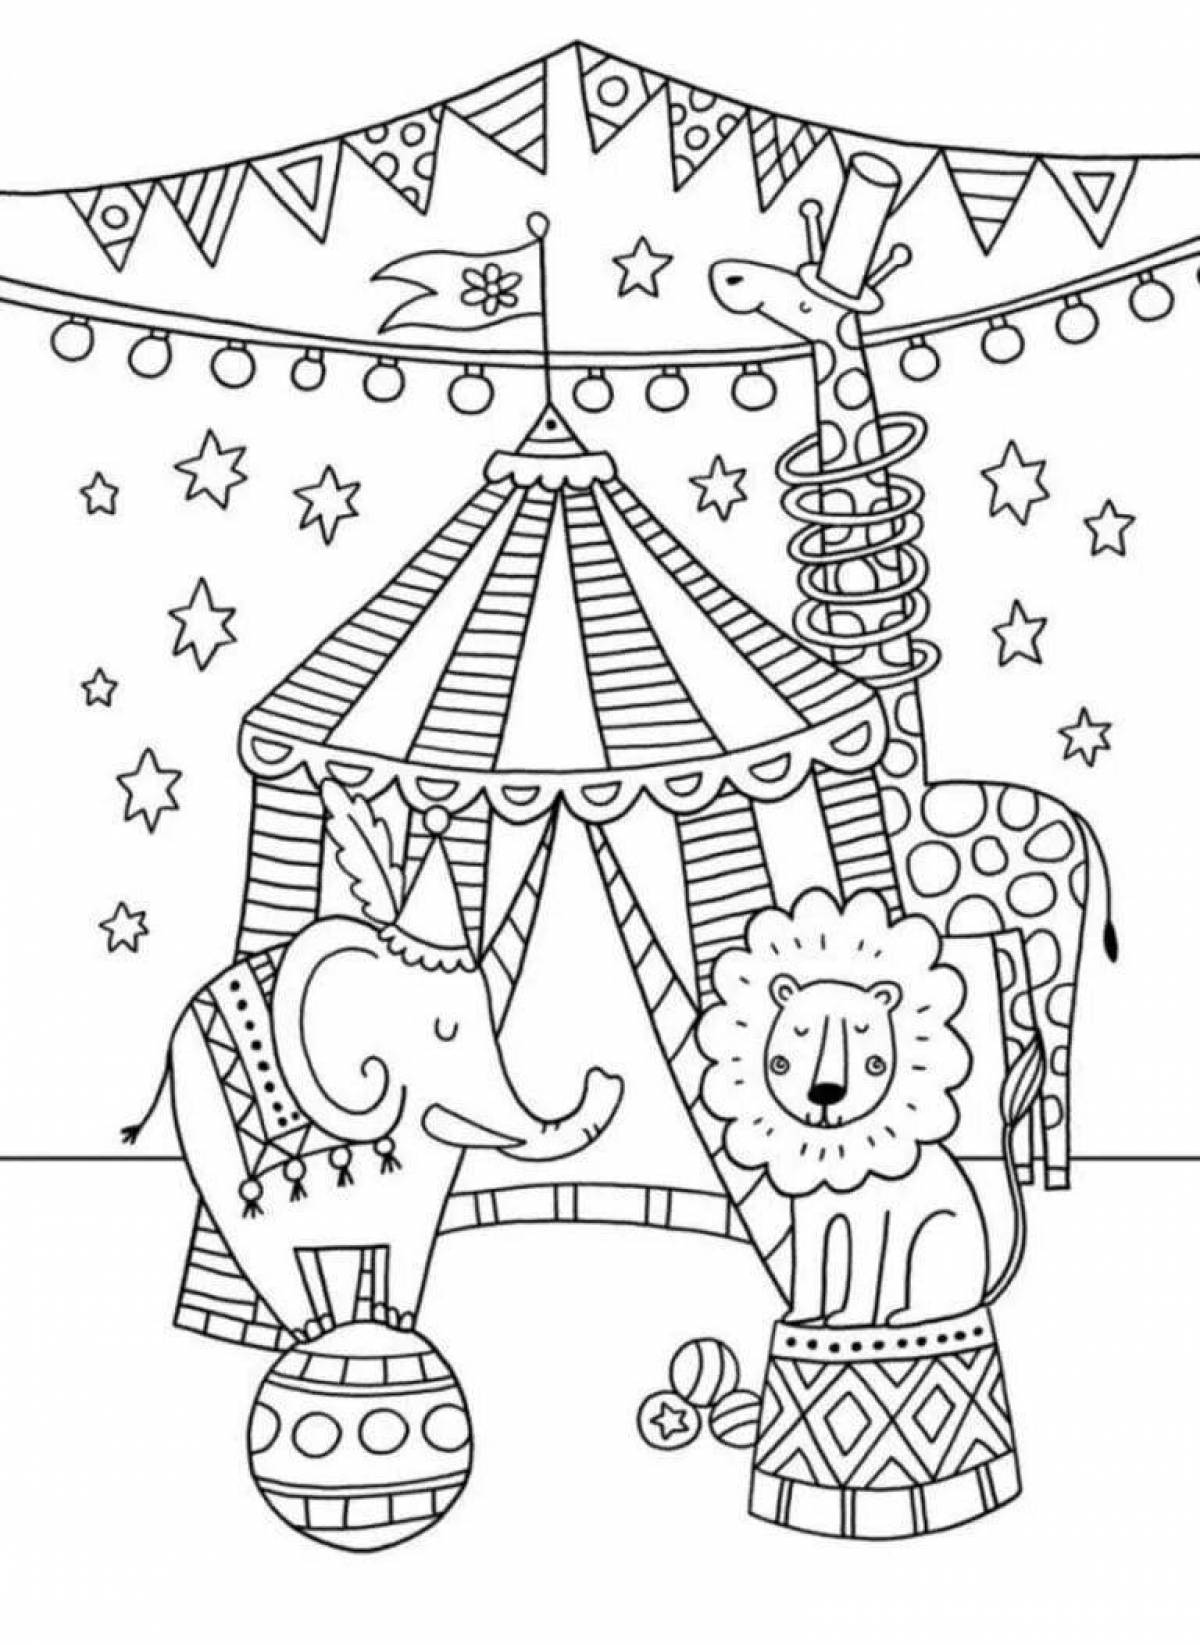 Fun circus coloring book for 7-8 year olds